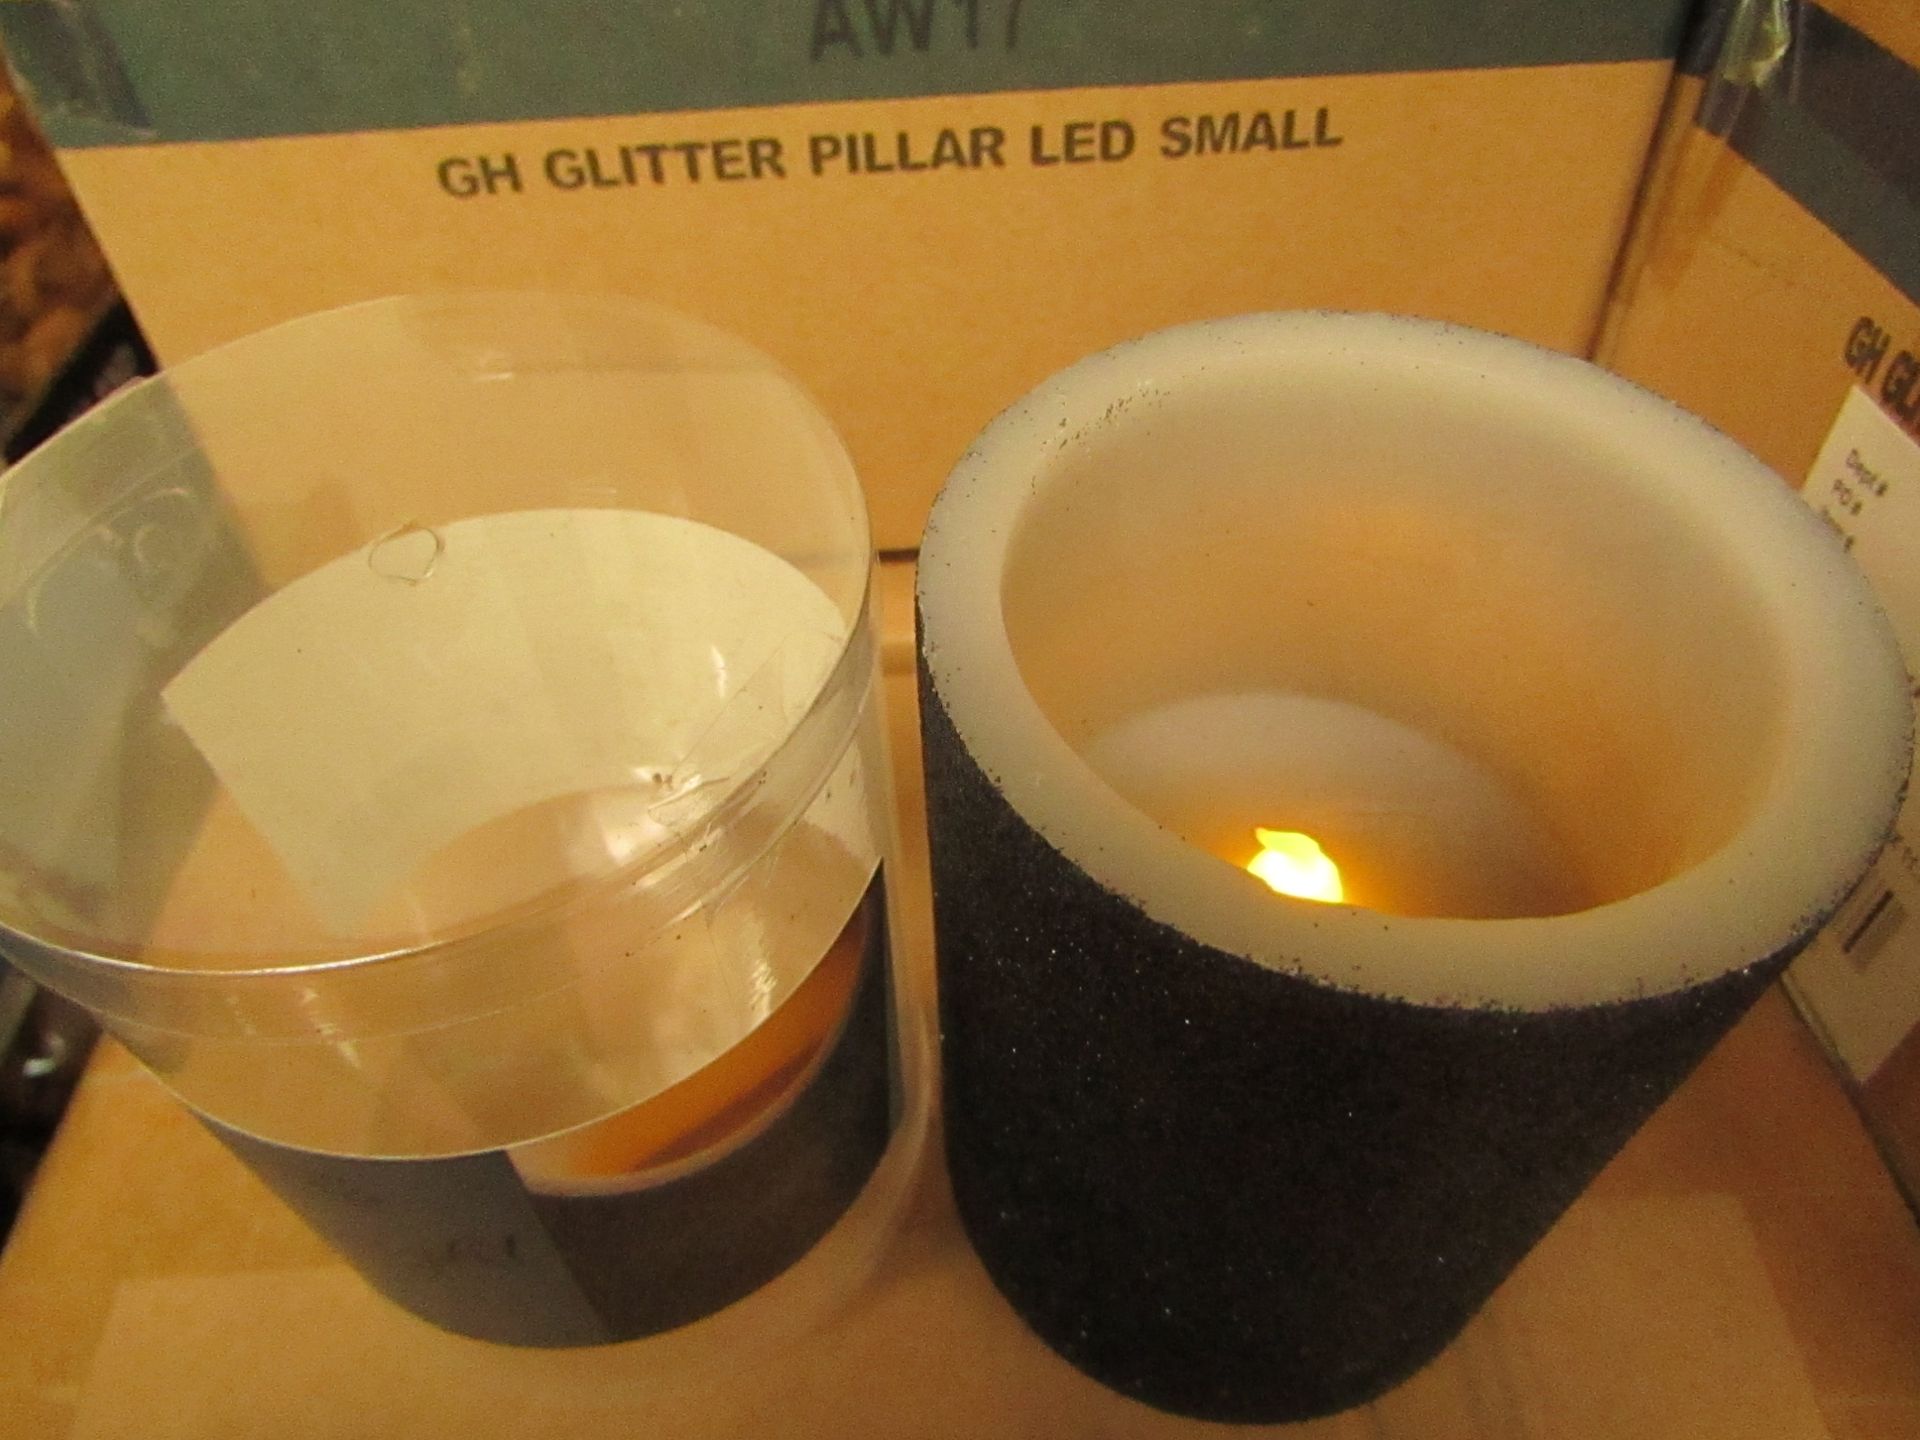 Box of 6 Glitter Pillar LED Candles Scented with Midnight Fig. New & Boxed